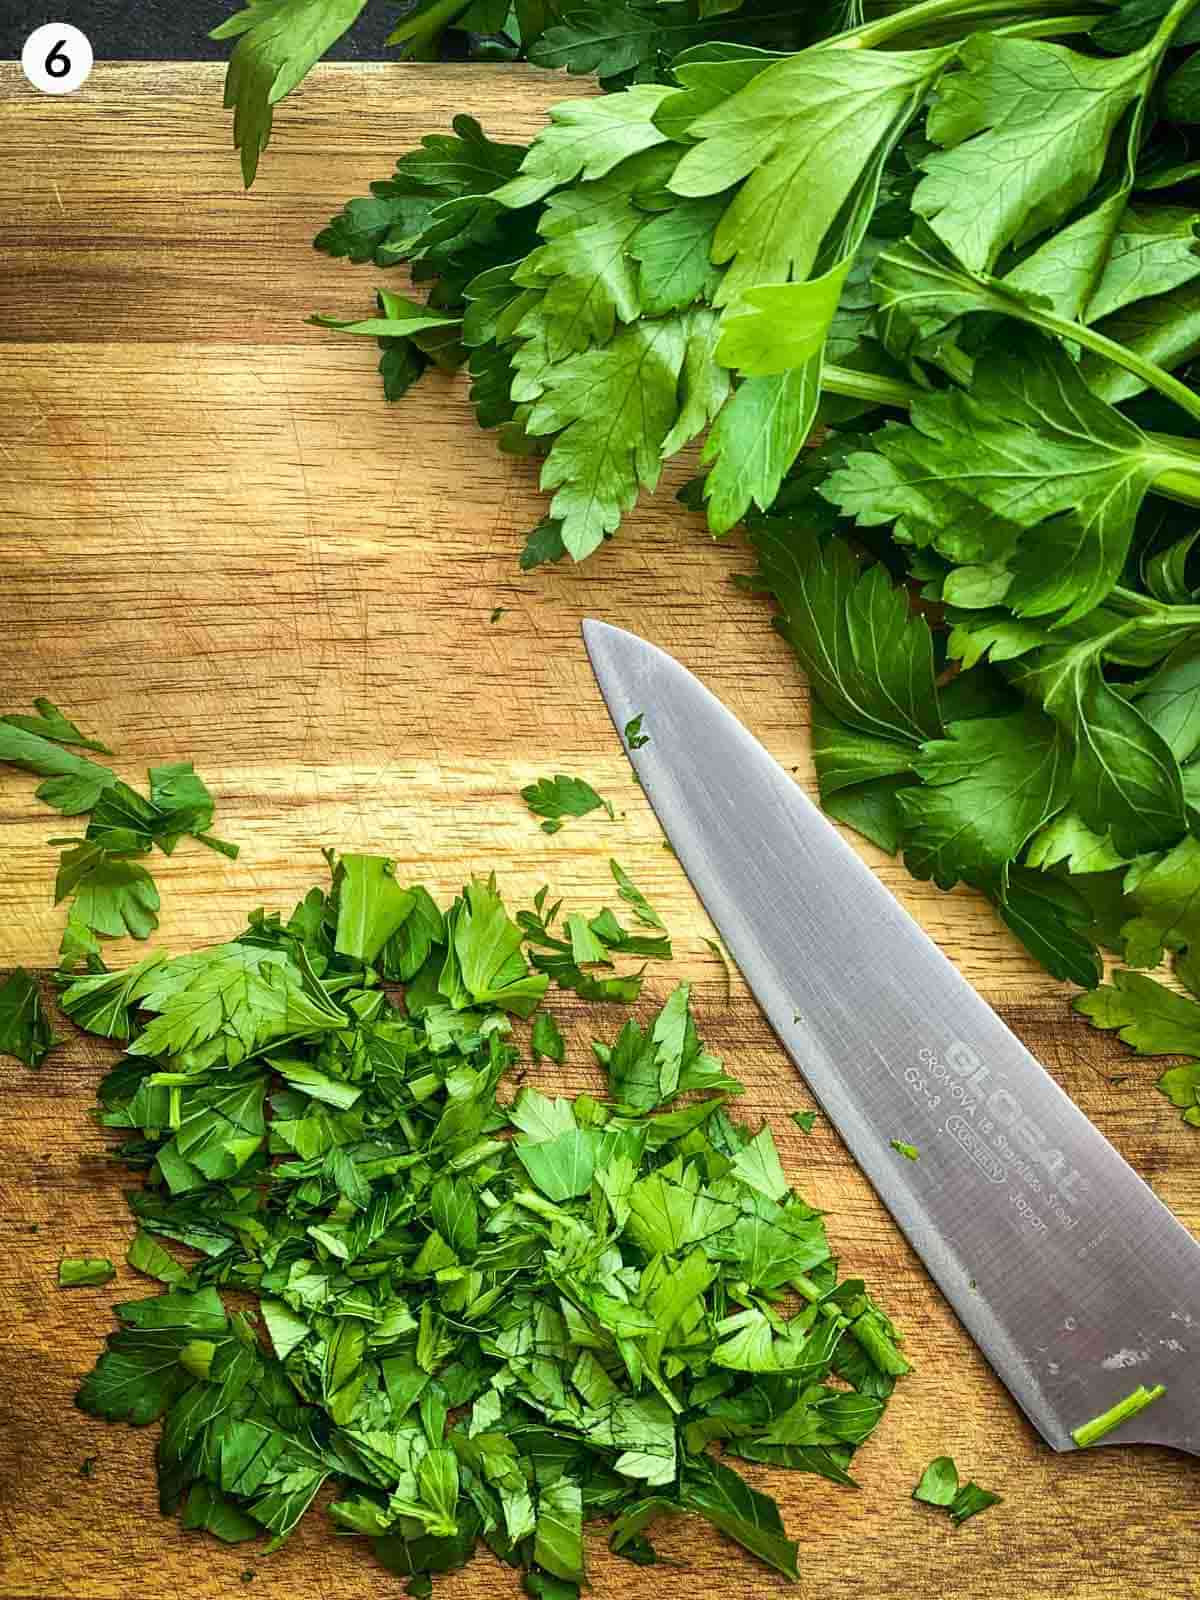 Cutting parsley with a knife on a wooden chopping board